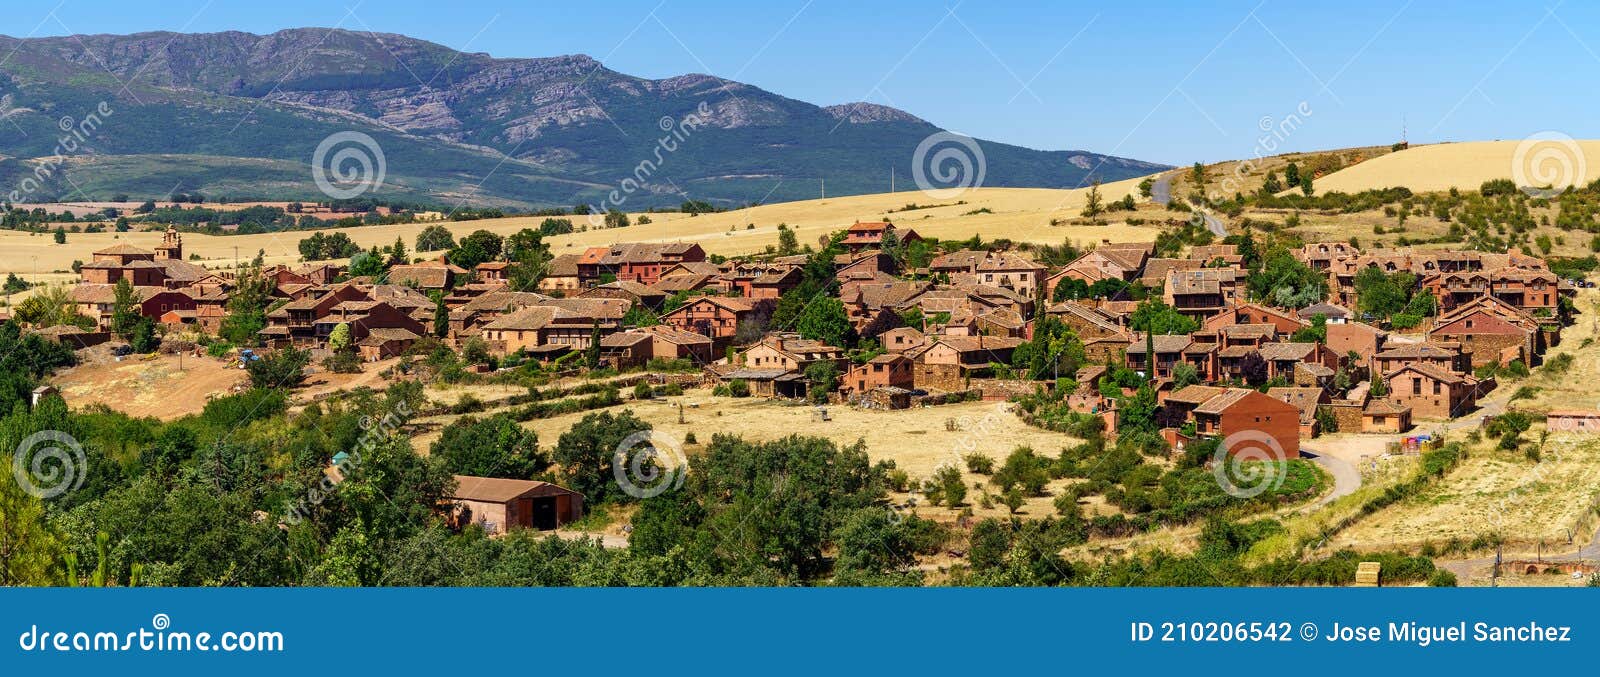 aerial view medieval village in the mountains called madriguera in segovia spain. europe